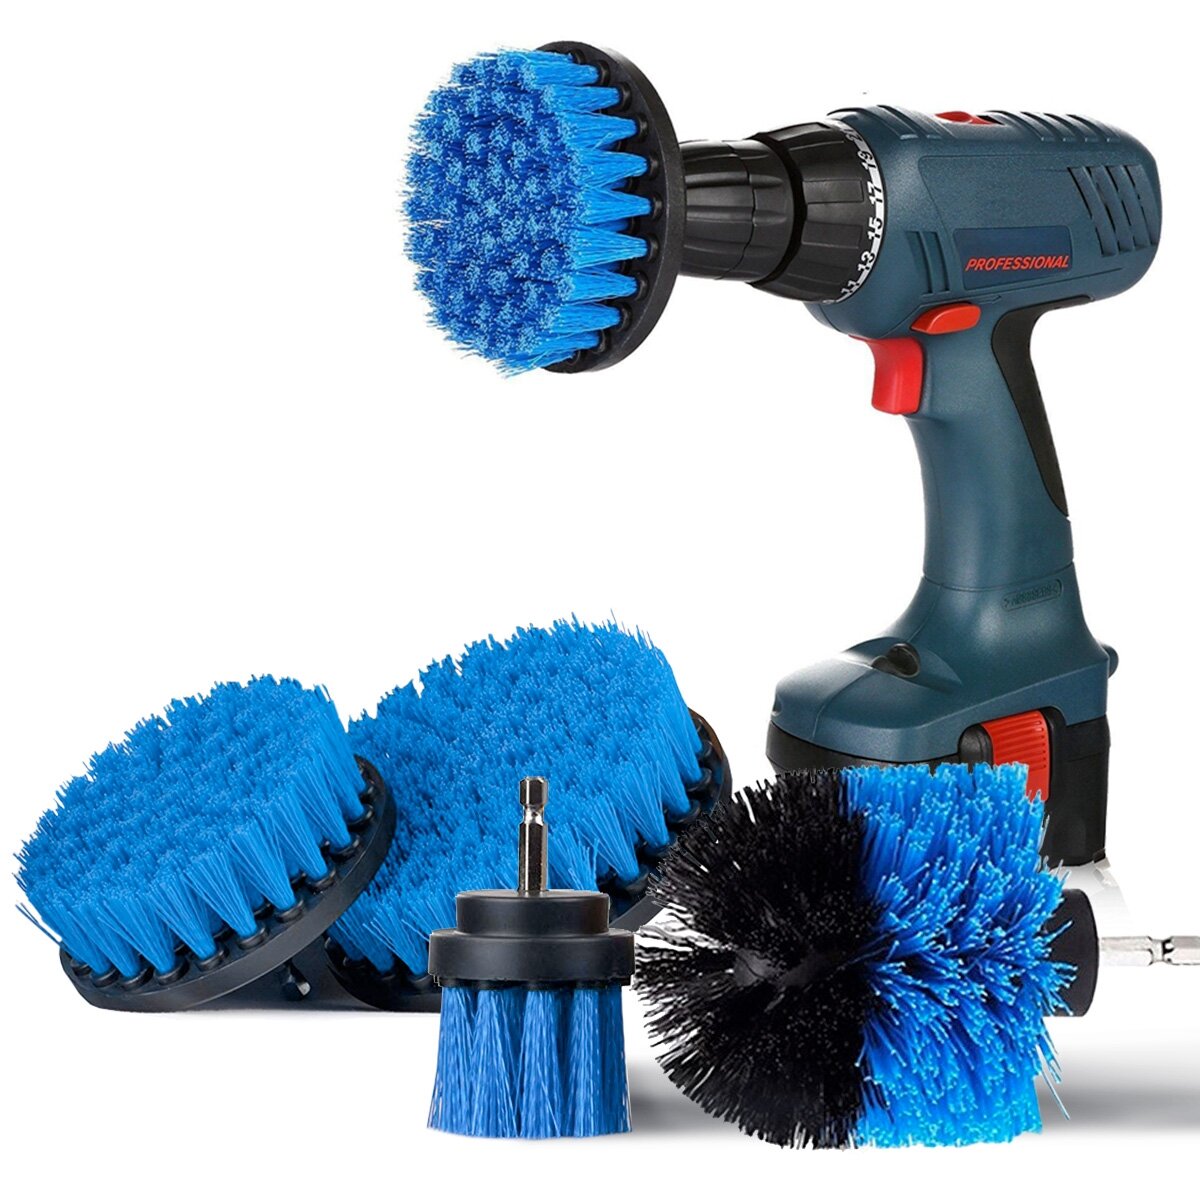 SAFETYON Drill Brush 4 Pieces Attachment Electric Drill Brushes for Cleaning Pool Tile Flooring Brick Ceramic Marble Grout Bathroom Car